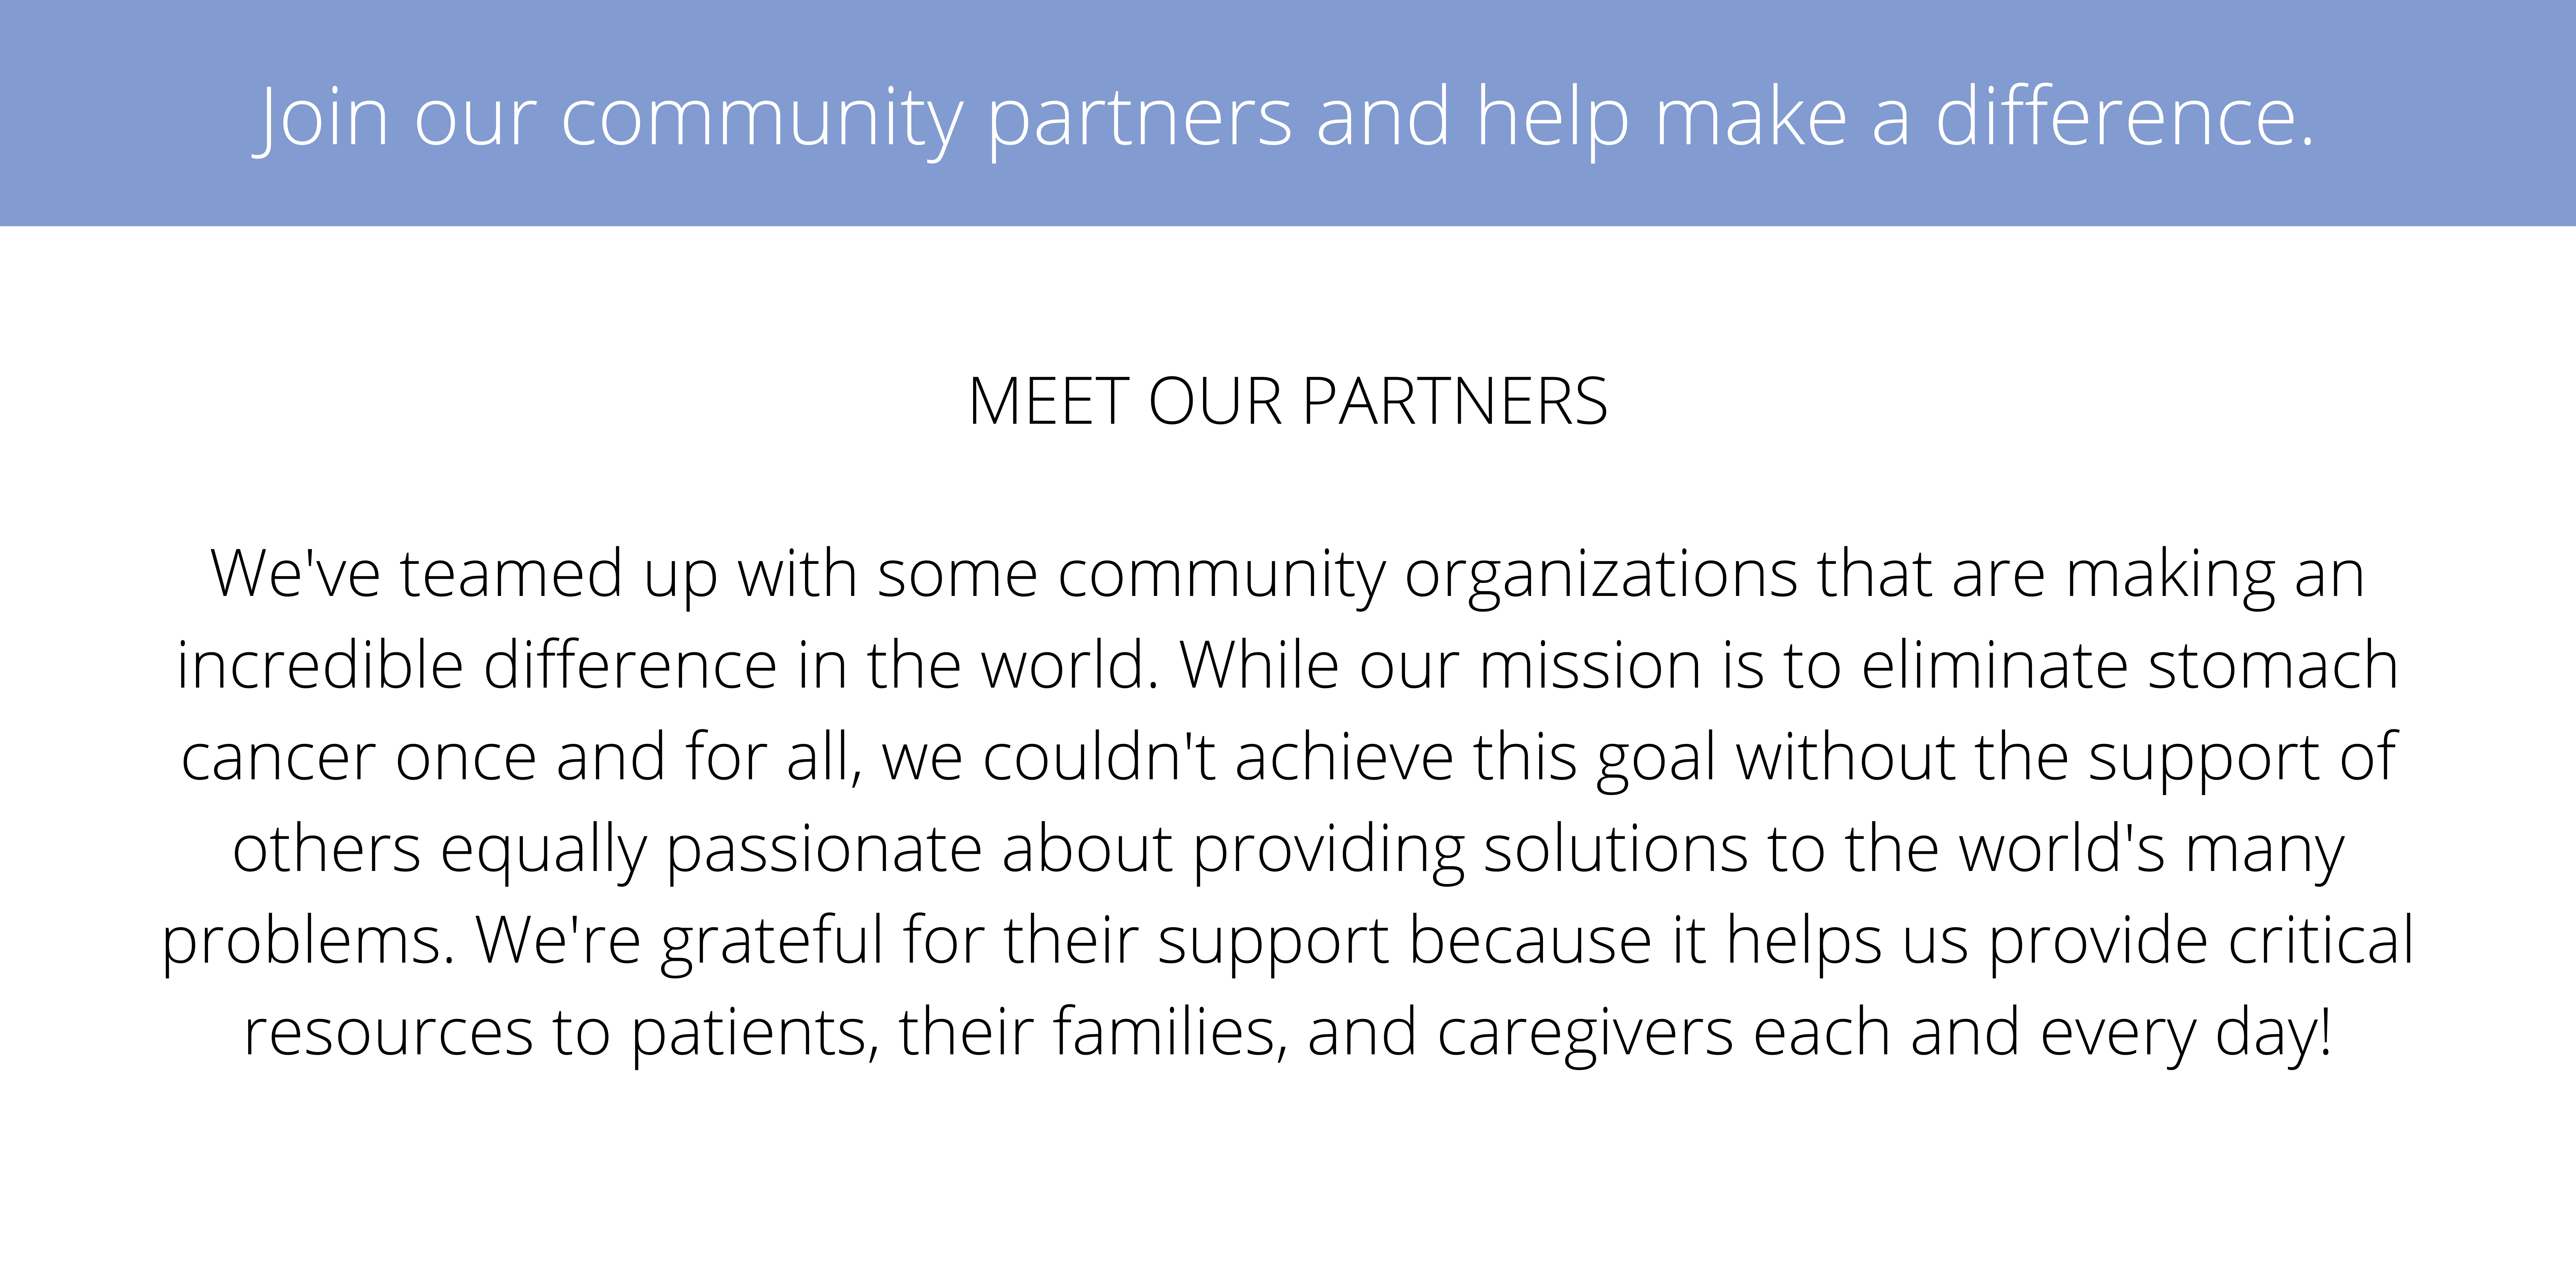 Join our community partners and help make a difference.